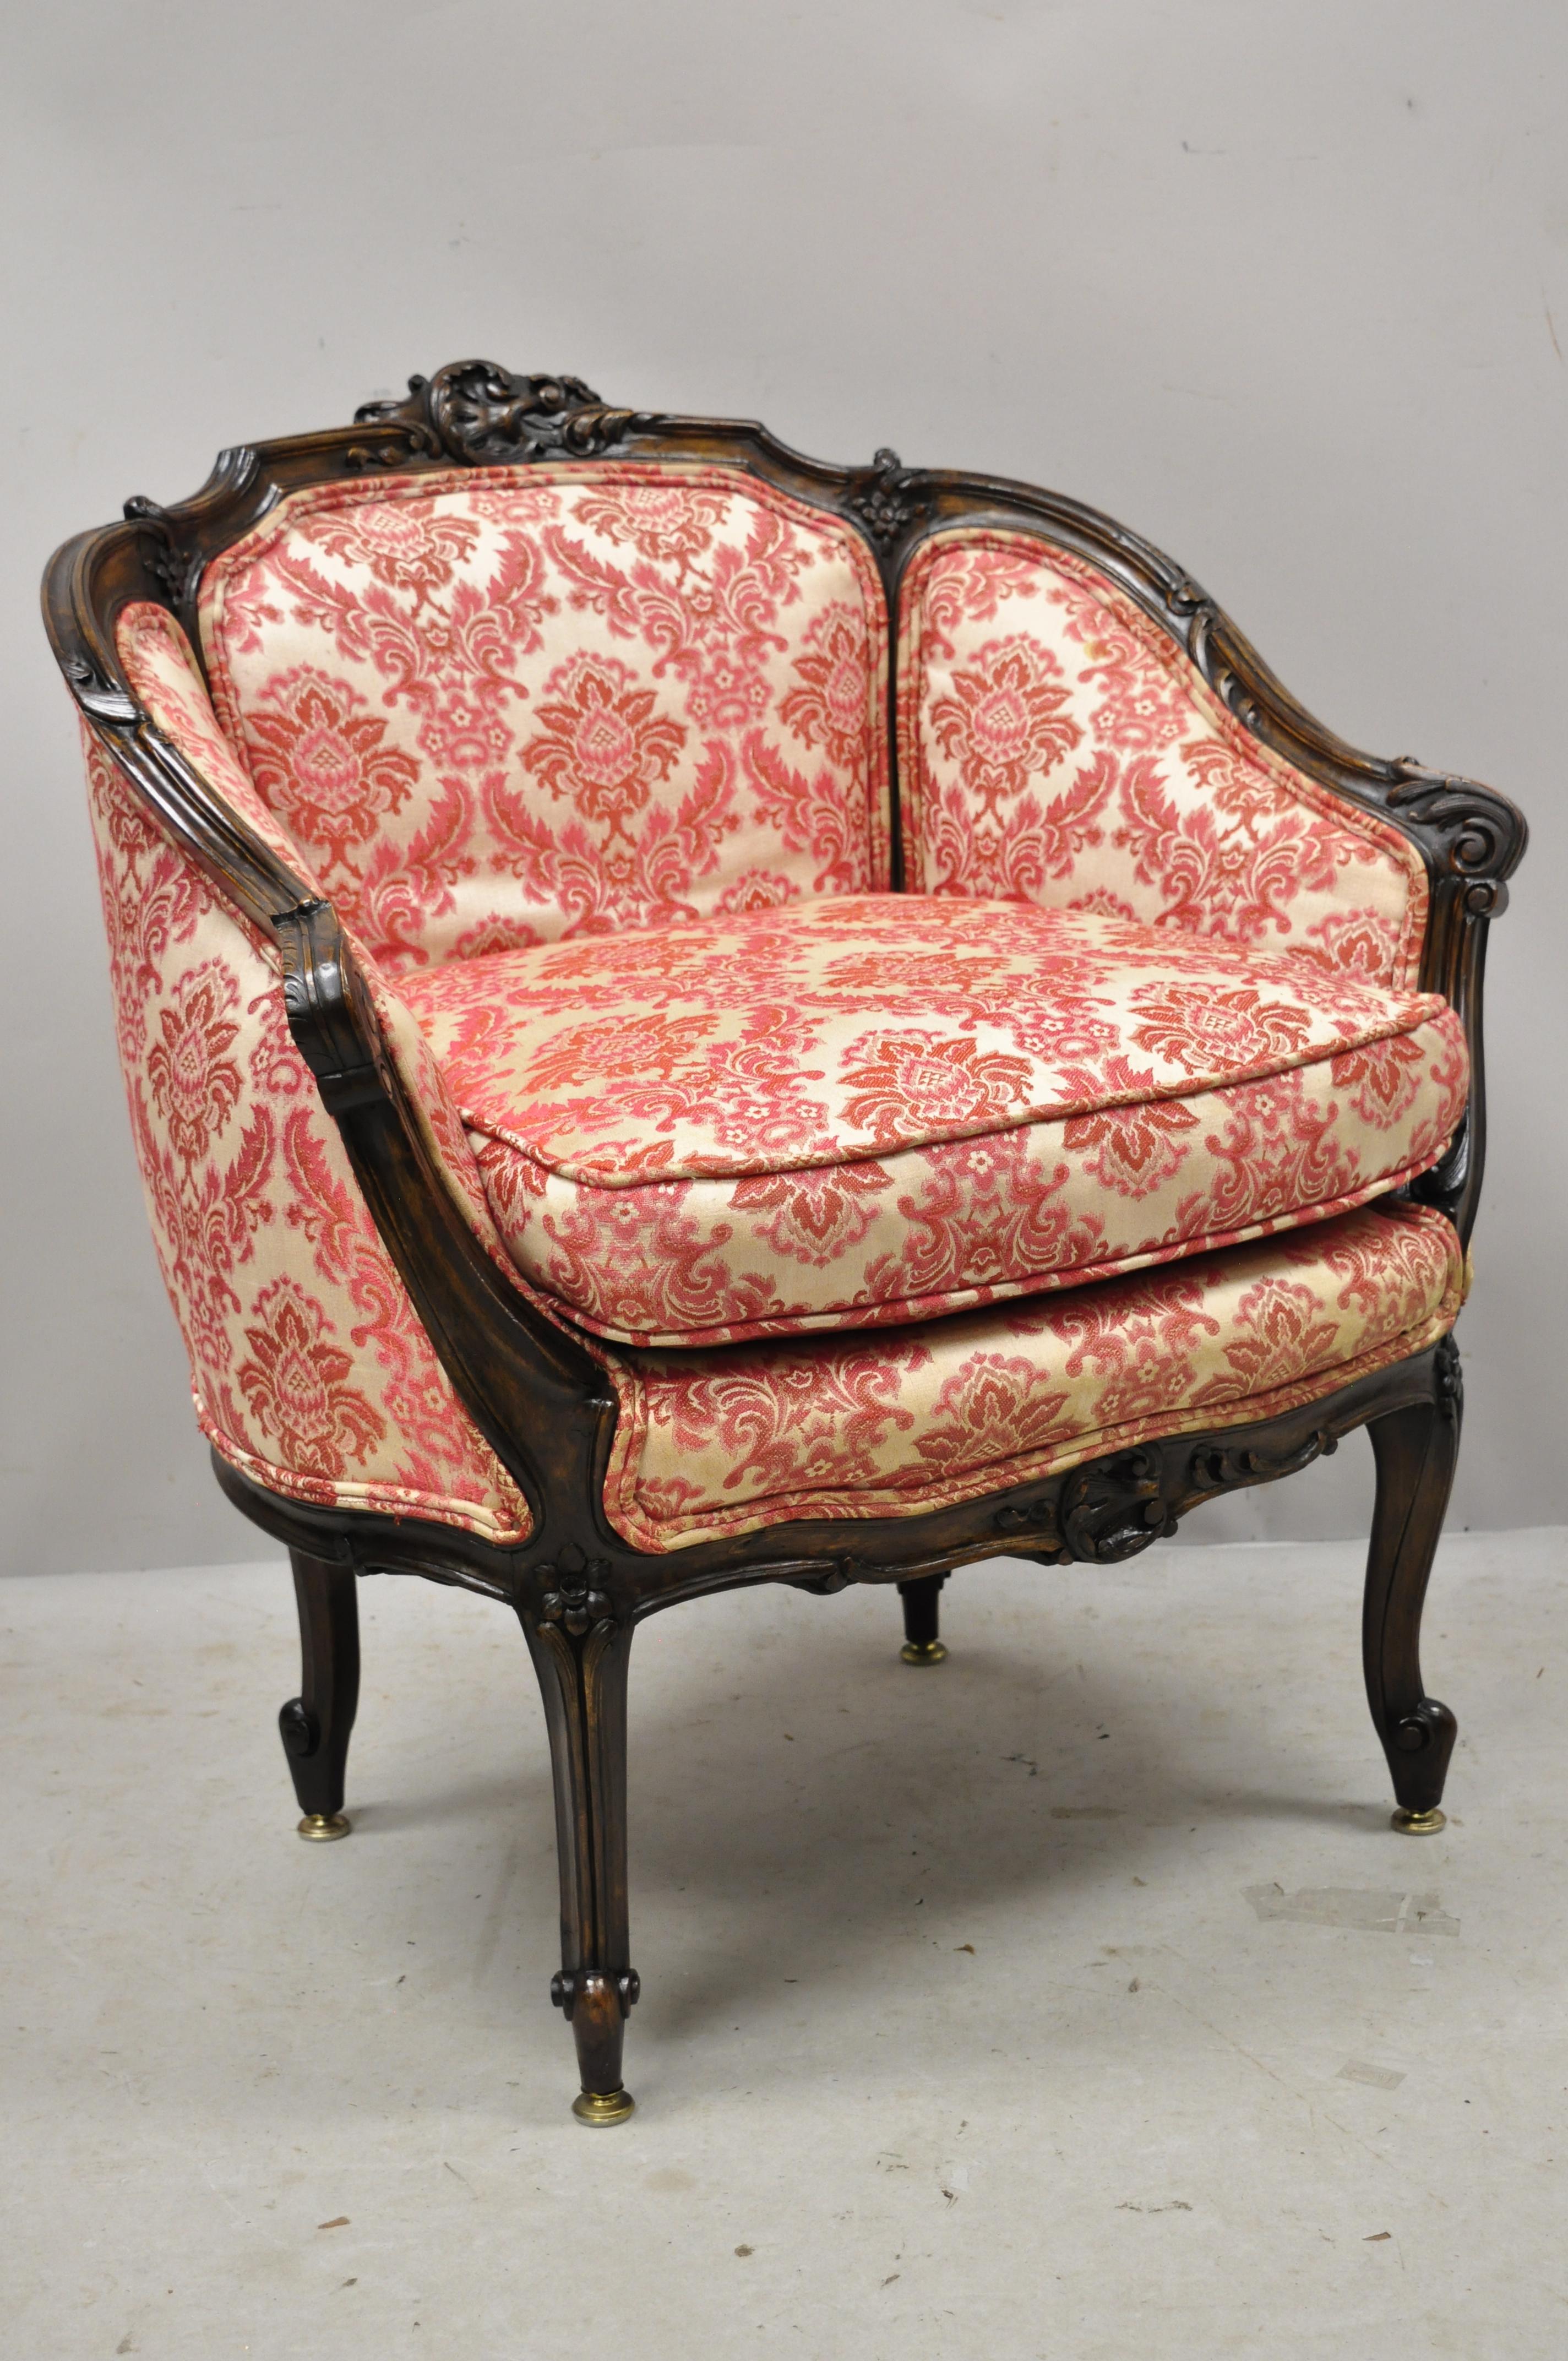 Antique French Louis XV Provincial style carved walnut upholstered boudoir accent chair. Item features solid wood frame, nicely carved details, cabriole legs, very nice antique item, great style and form, circa early 1900s. Measurements: 32